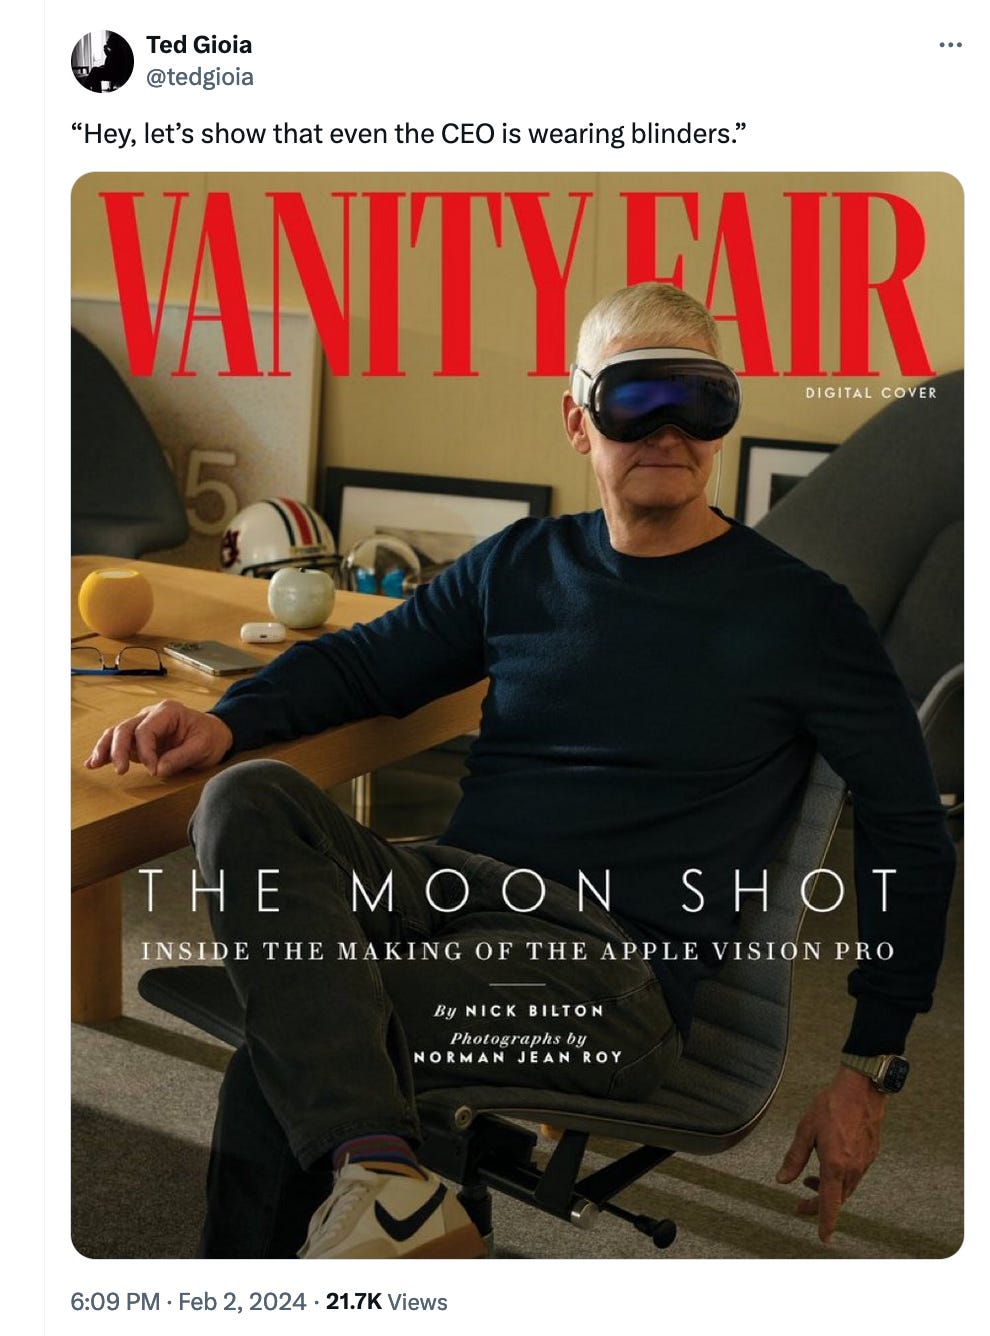 Tweet with photo of Apple CEO Tim Cook wearing a virtual reality headset